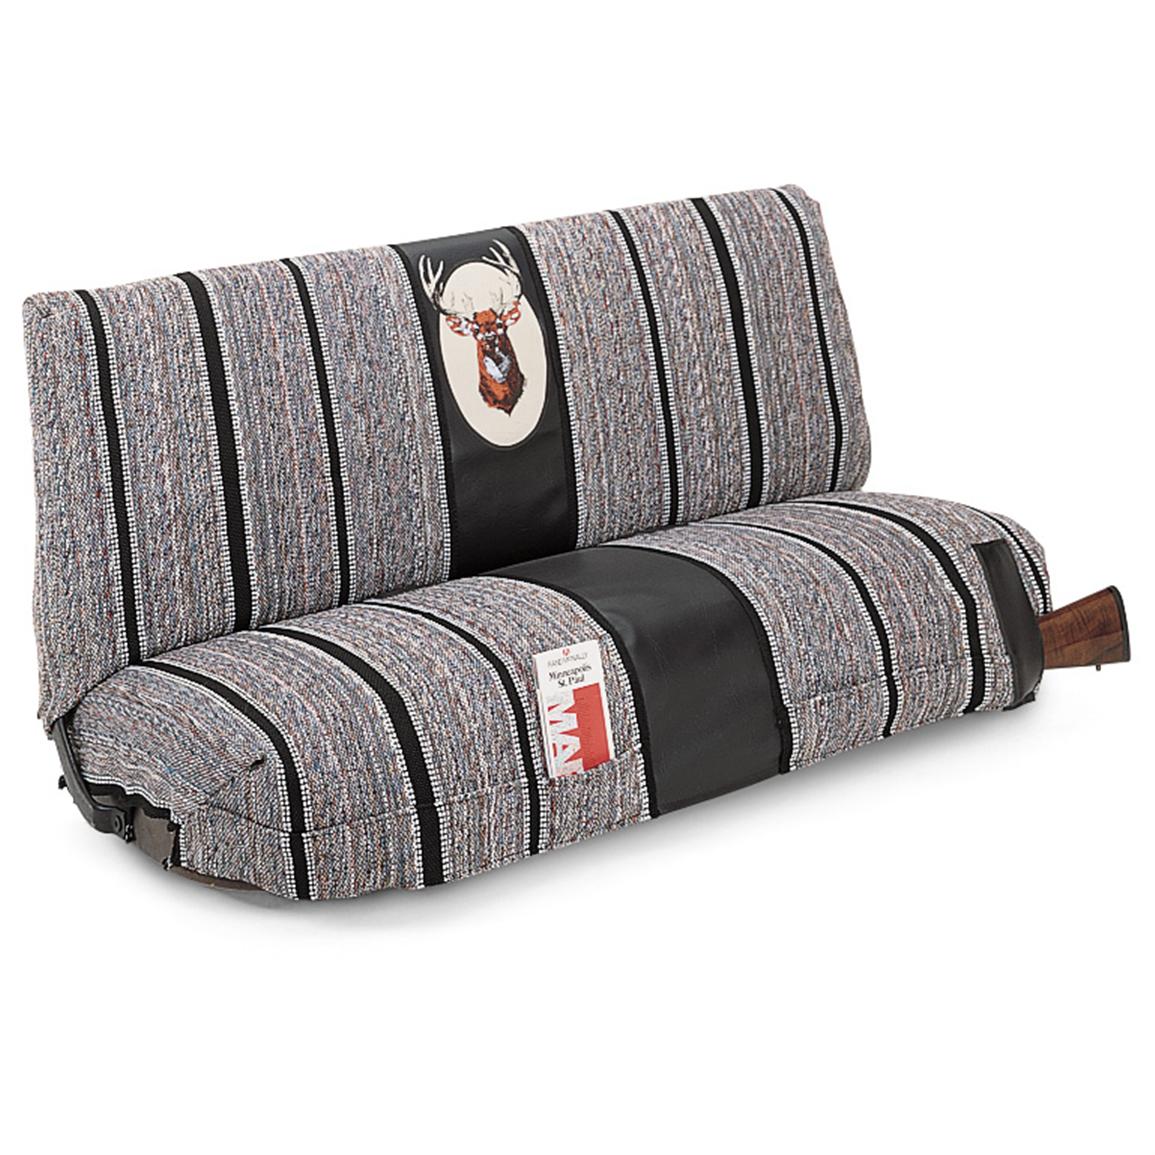 Saddle Blanket Bench Seat Cover 154486, Seat Covers at Sportsman's Guide